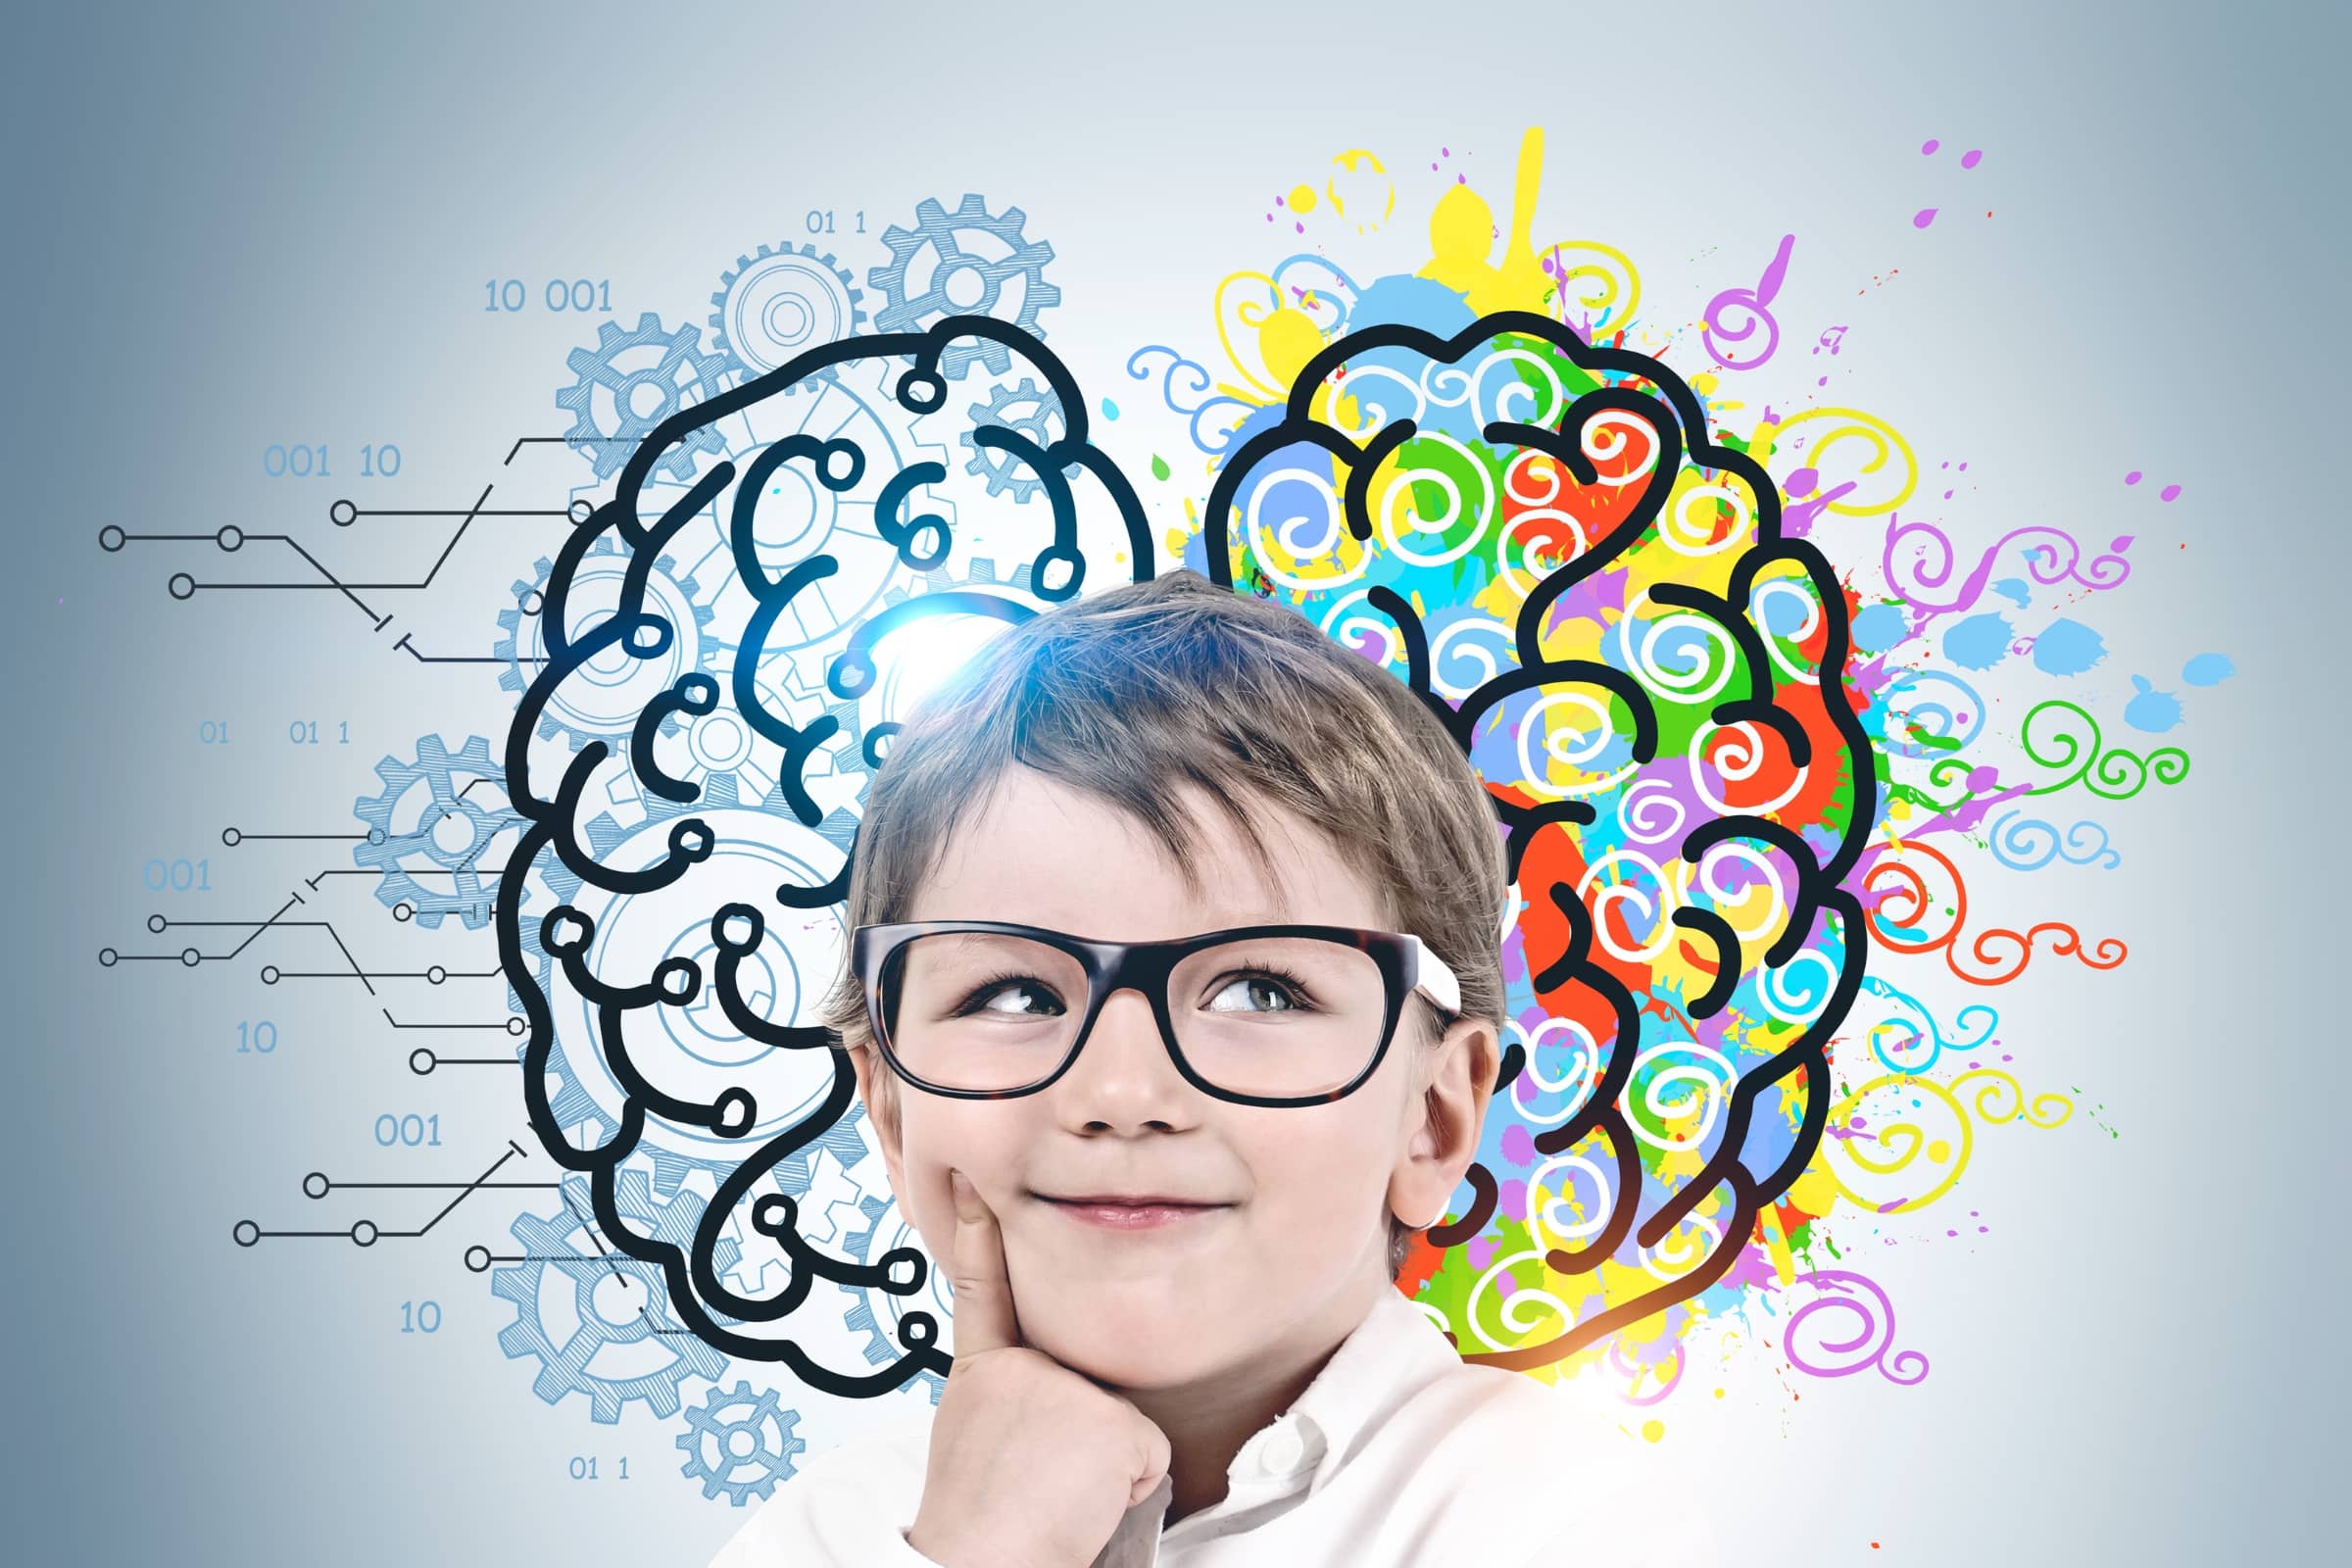 Child with glasses smiling thinking with brain graphic